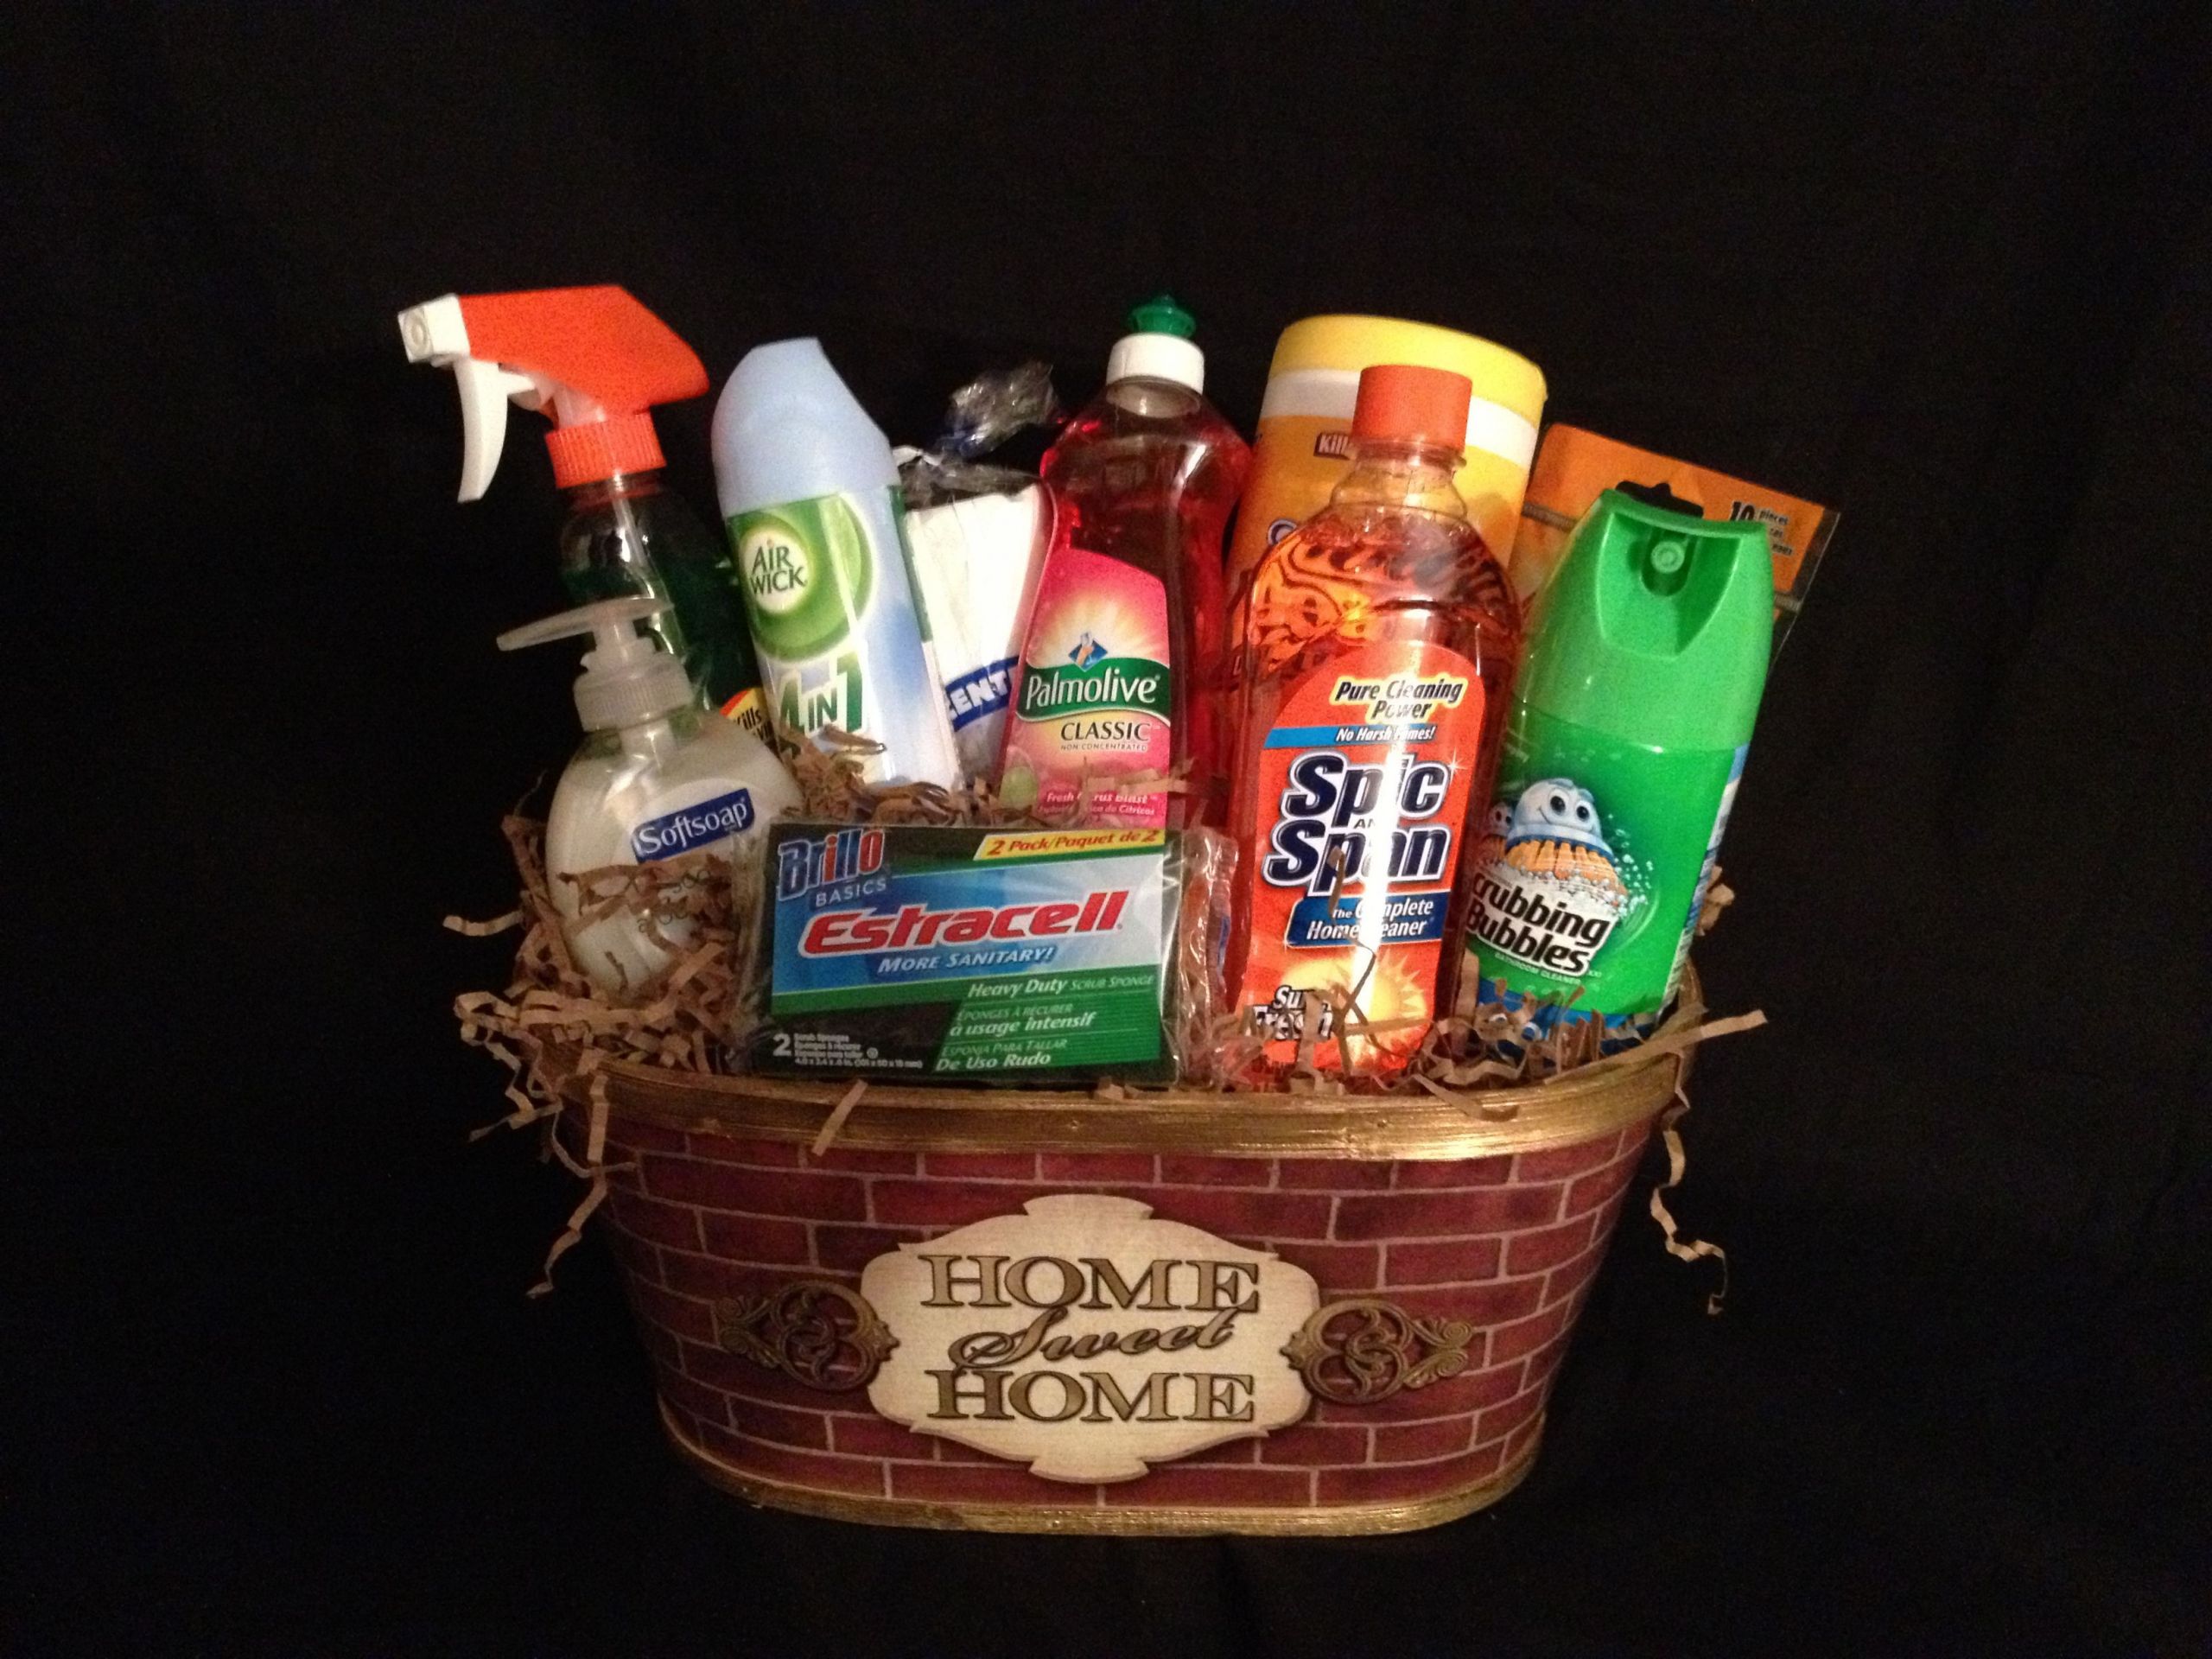 New Home Gift Basket Ideas
 Home Sweet Home Basket This basket contains the essential cleaning items one will need when